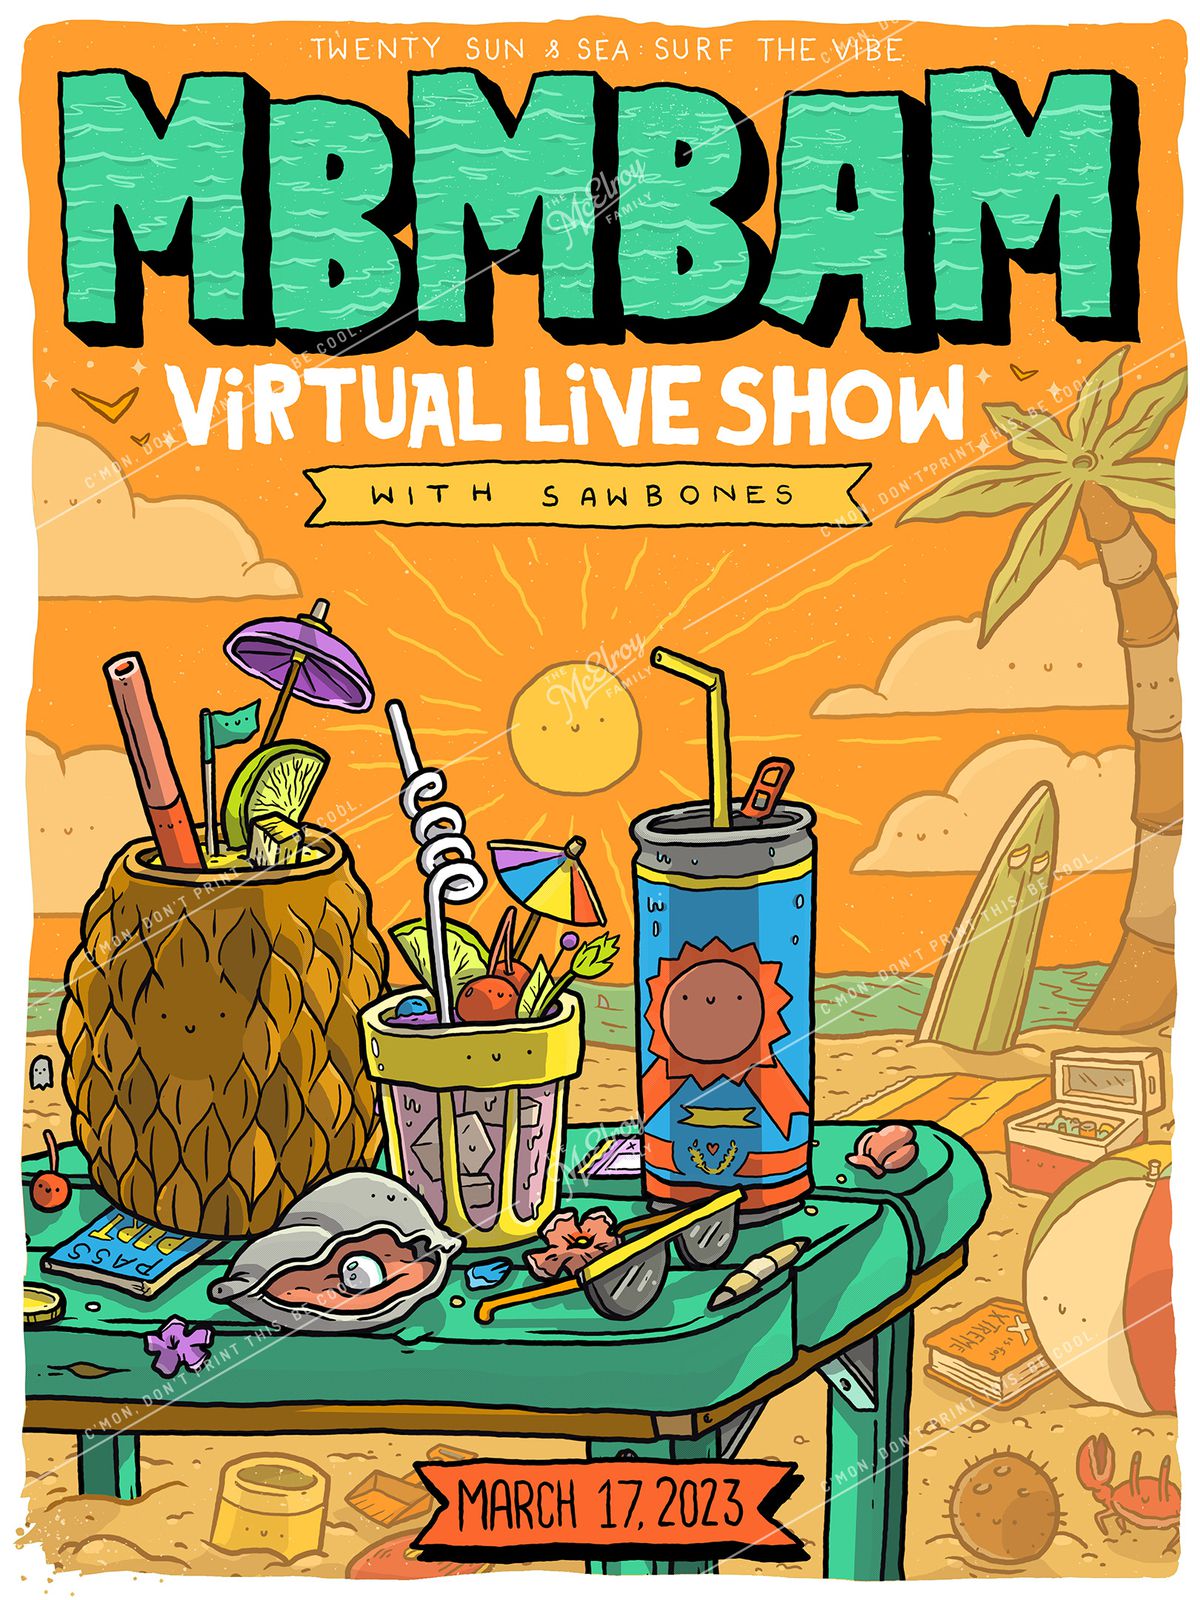 An illustrated beach scene. Text at the top reads “Twenty Sun and Sea: Surf the Vibe MBMBaM Virtual Live Show with Sawbones”. Text at the bottom reads “March 17, 2023”. In the front is a table with three drinks on it, one a pineapple, one a glass, and one a can. There are other small items on the table. On the sand behind it are a surfboard, towel, book, and other beach items. A palm tree is on the right. In the distance there is water, sun, and clouds. Every item has a tiny smiley face on it. 